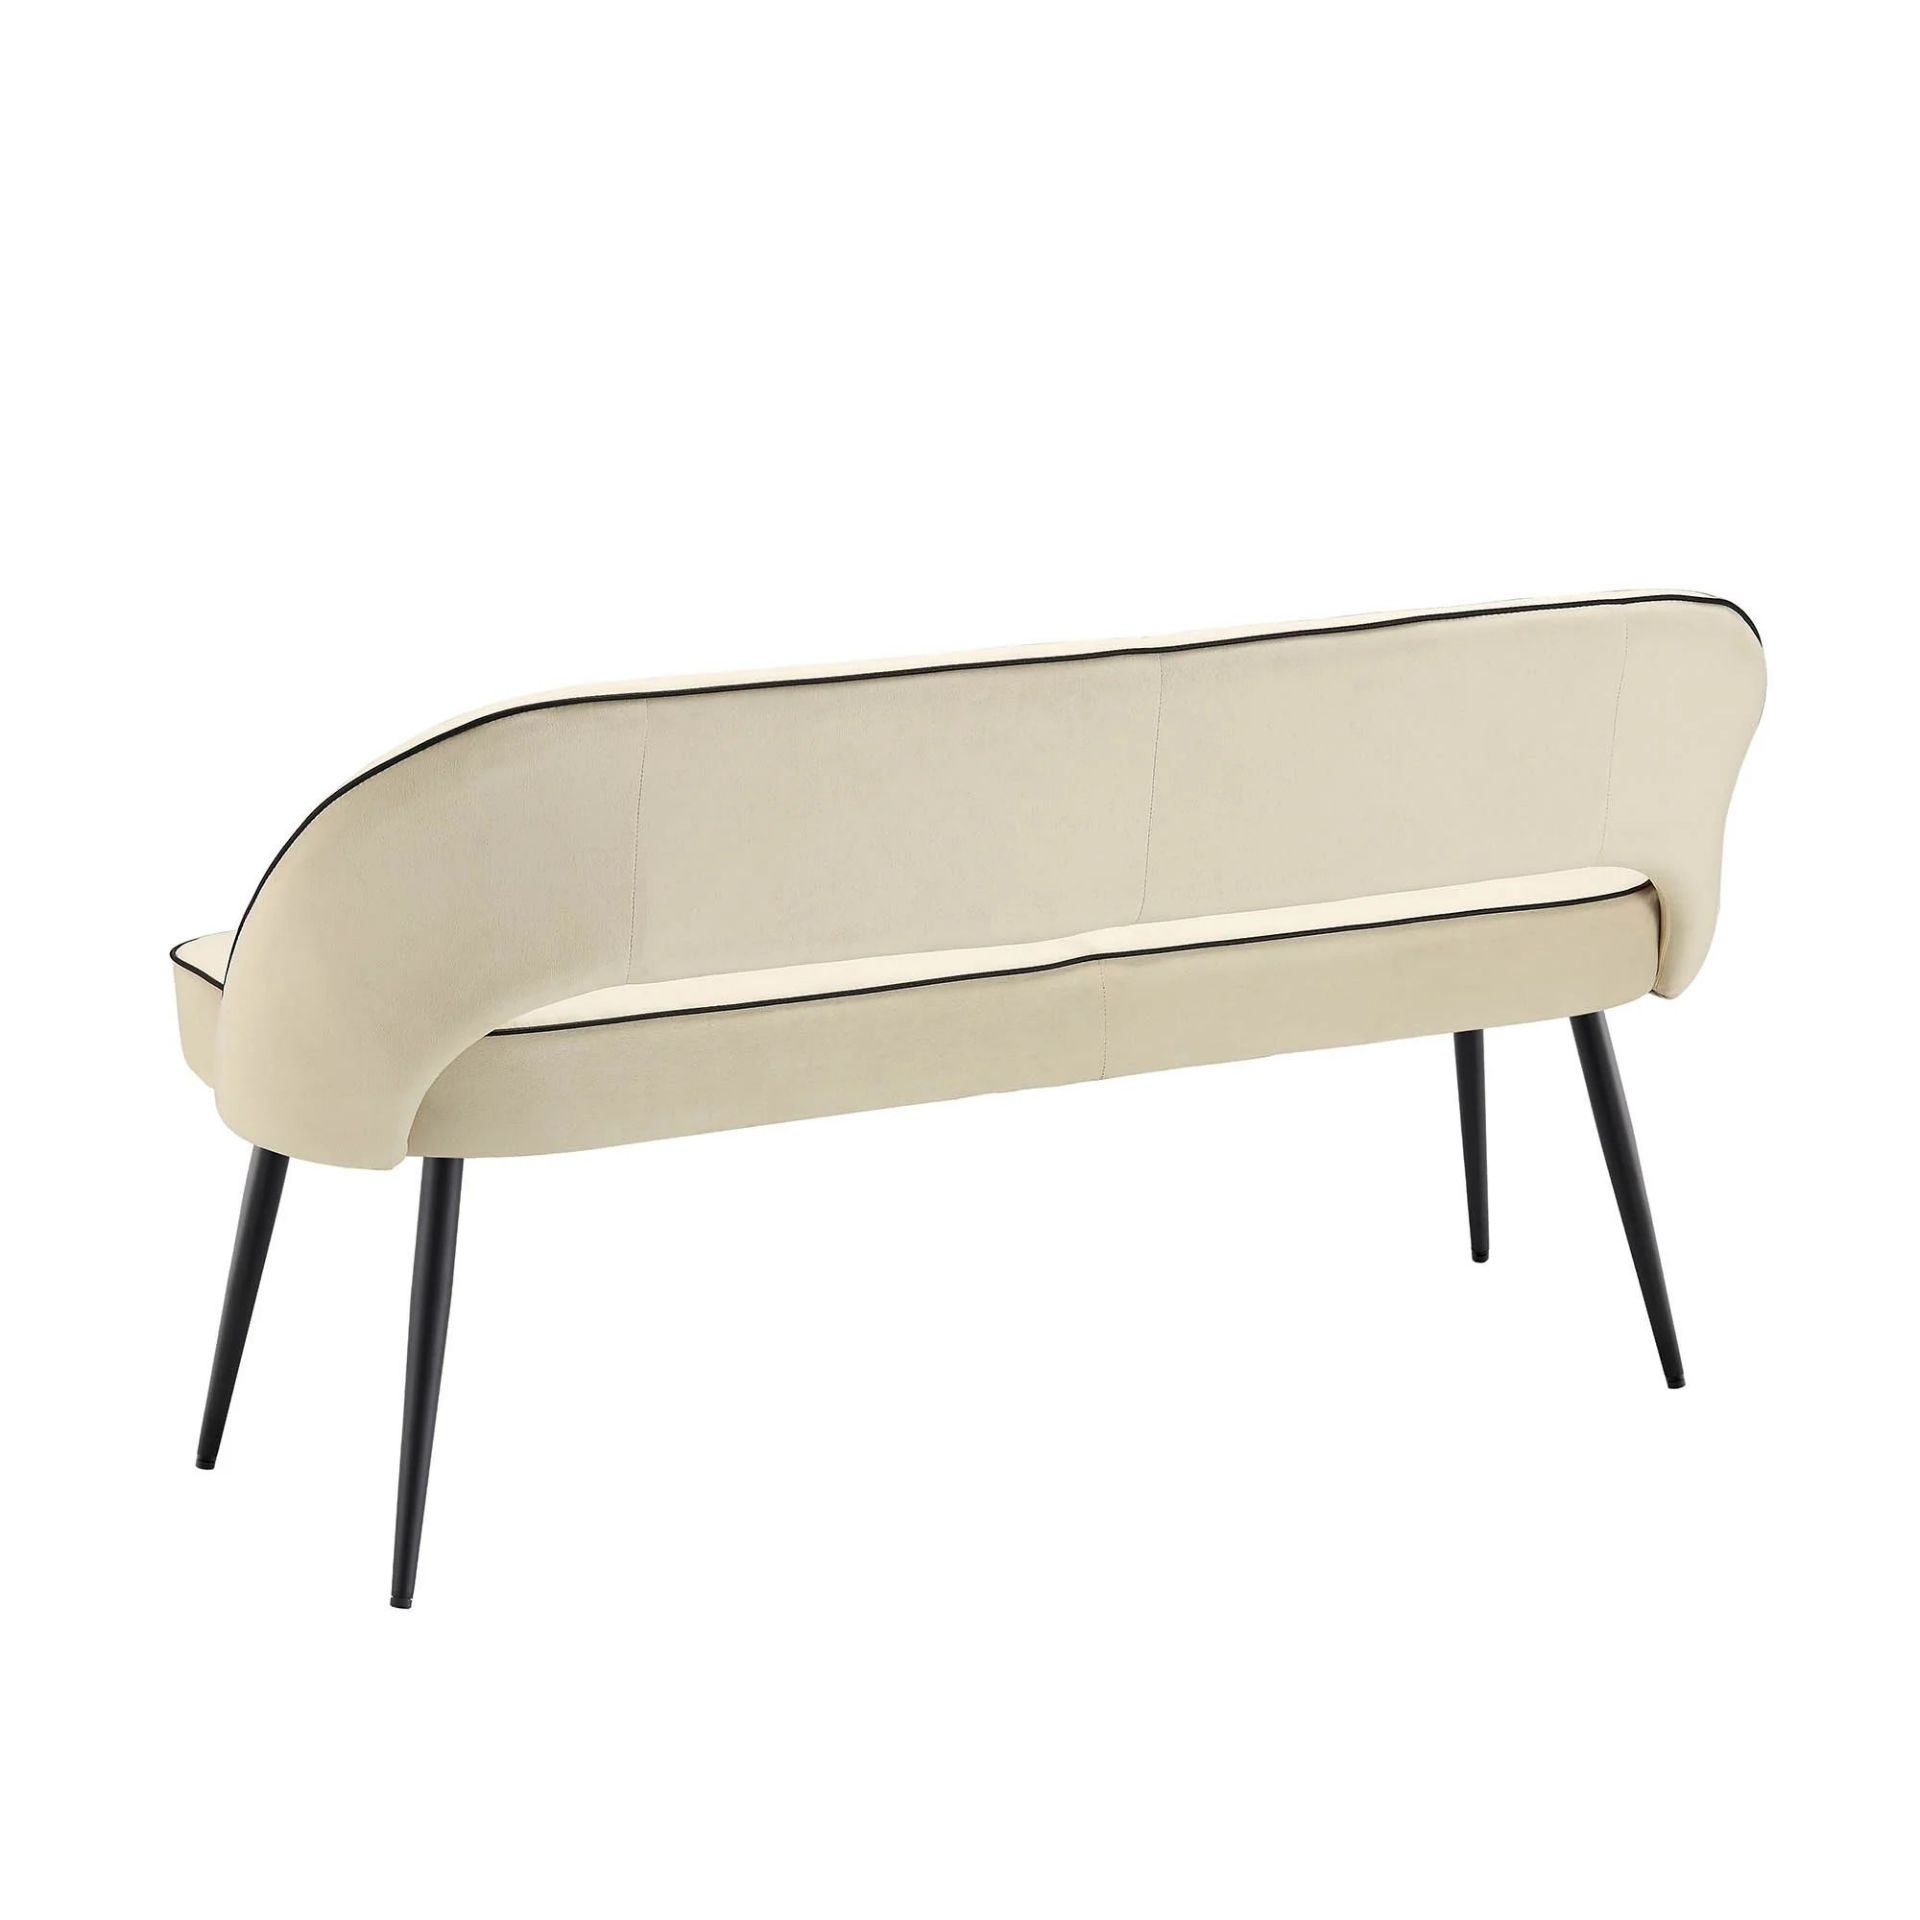 Oakley Champagne Velvet Upholstered 3 Seater Dining Bench with Contrast Piping. - R14. RRP £299. - Image 2 of 2